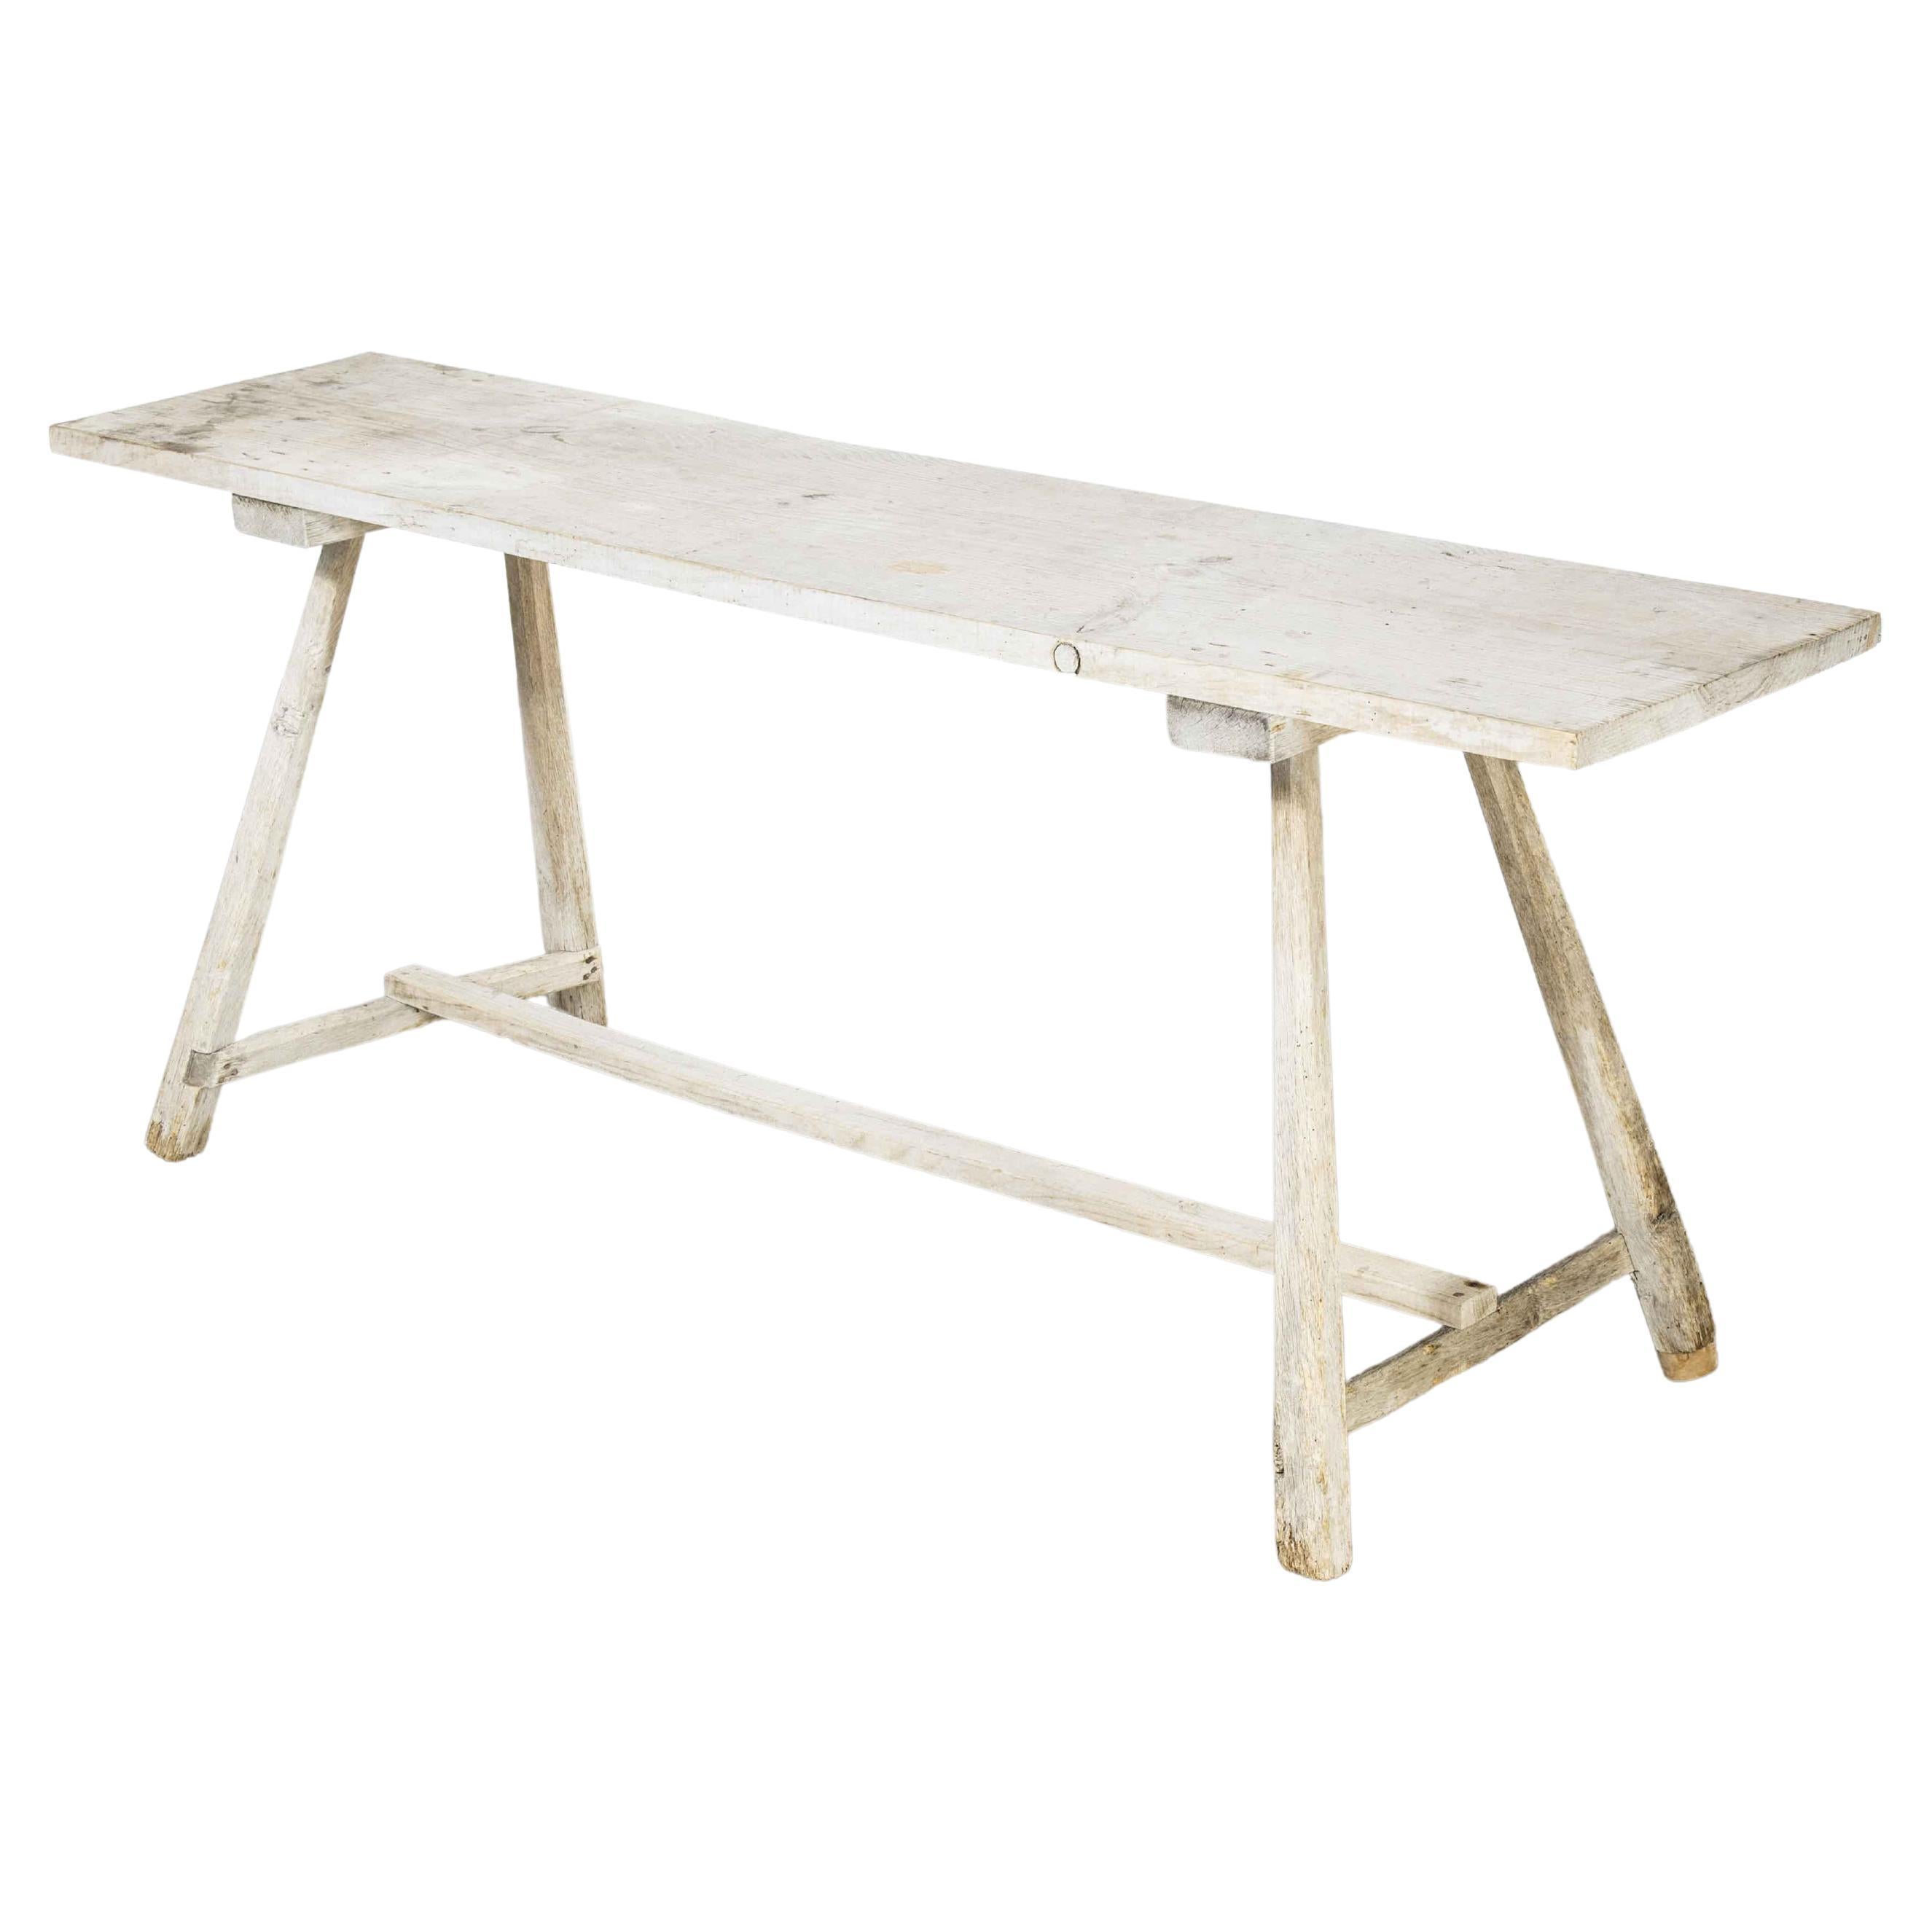 19th Century Original French Washing Table, Scrubbed and Bleached Top